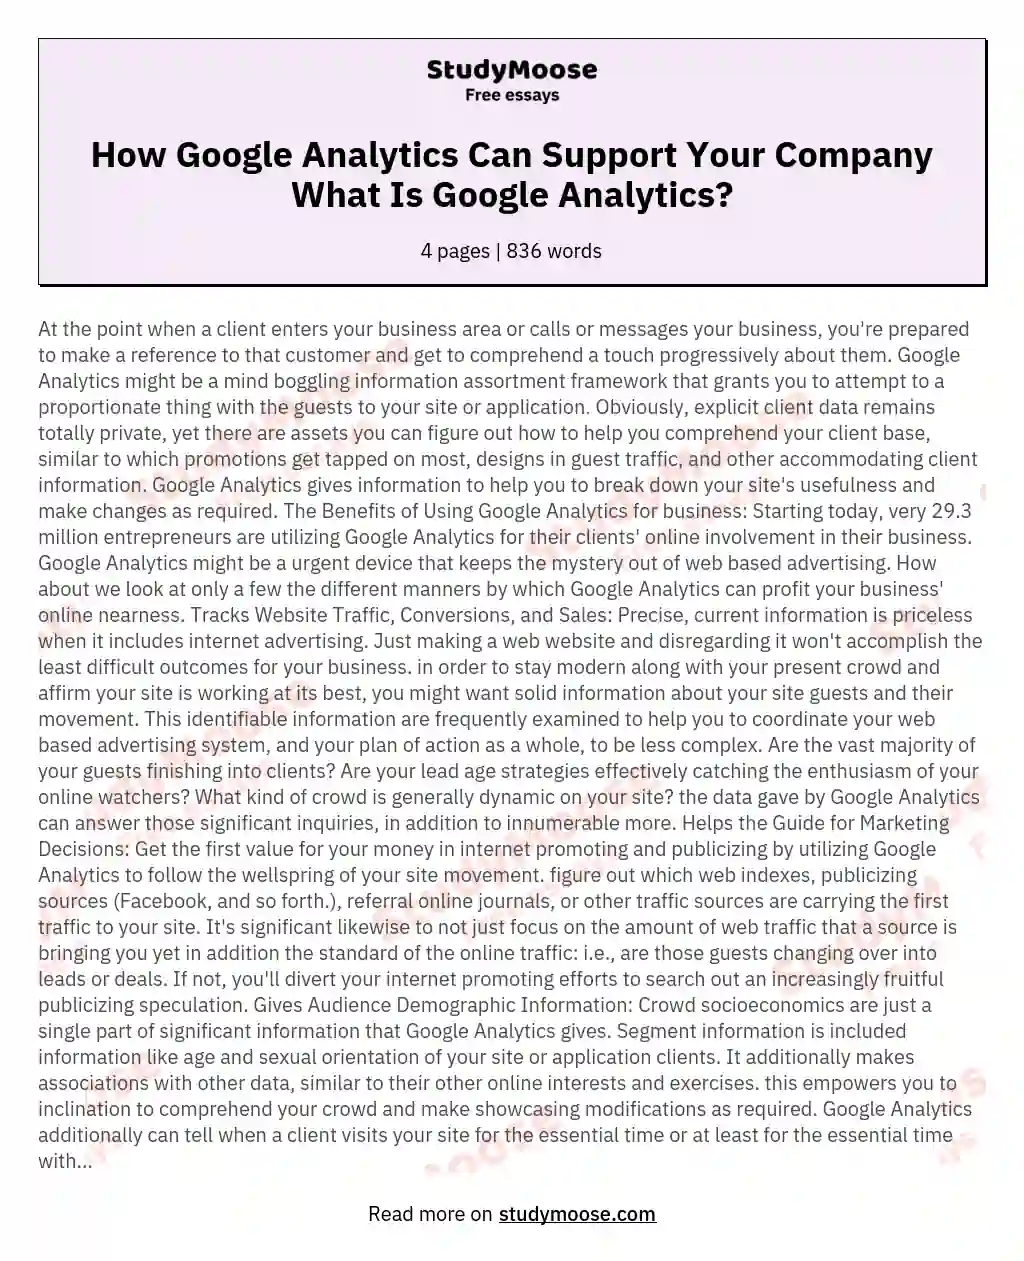 How Google Analytics Can Support Your Company What Is Google Analytics?